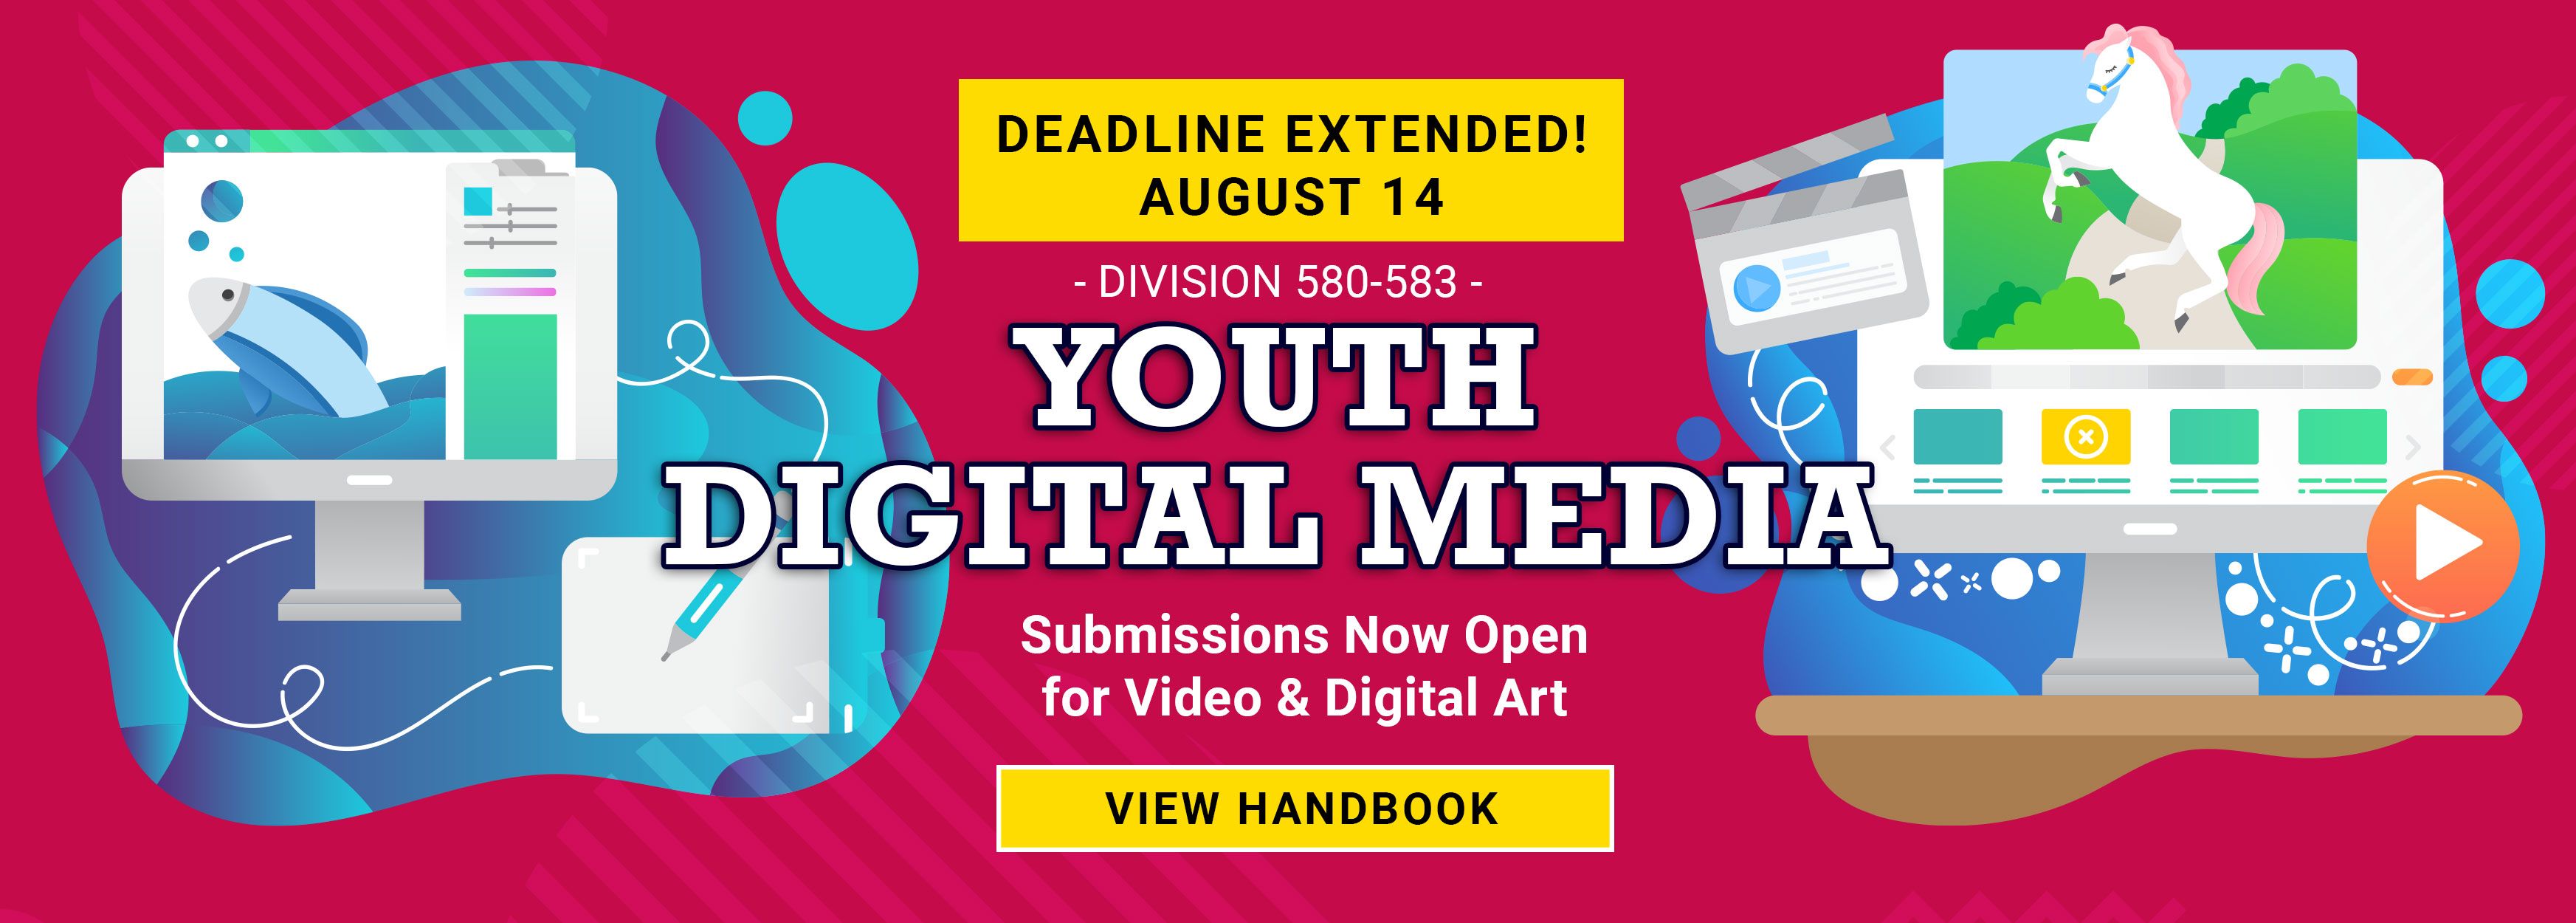 Deadline Extended for Youth Digital Media Sumbissions